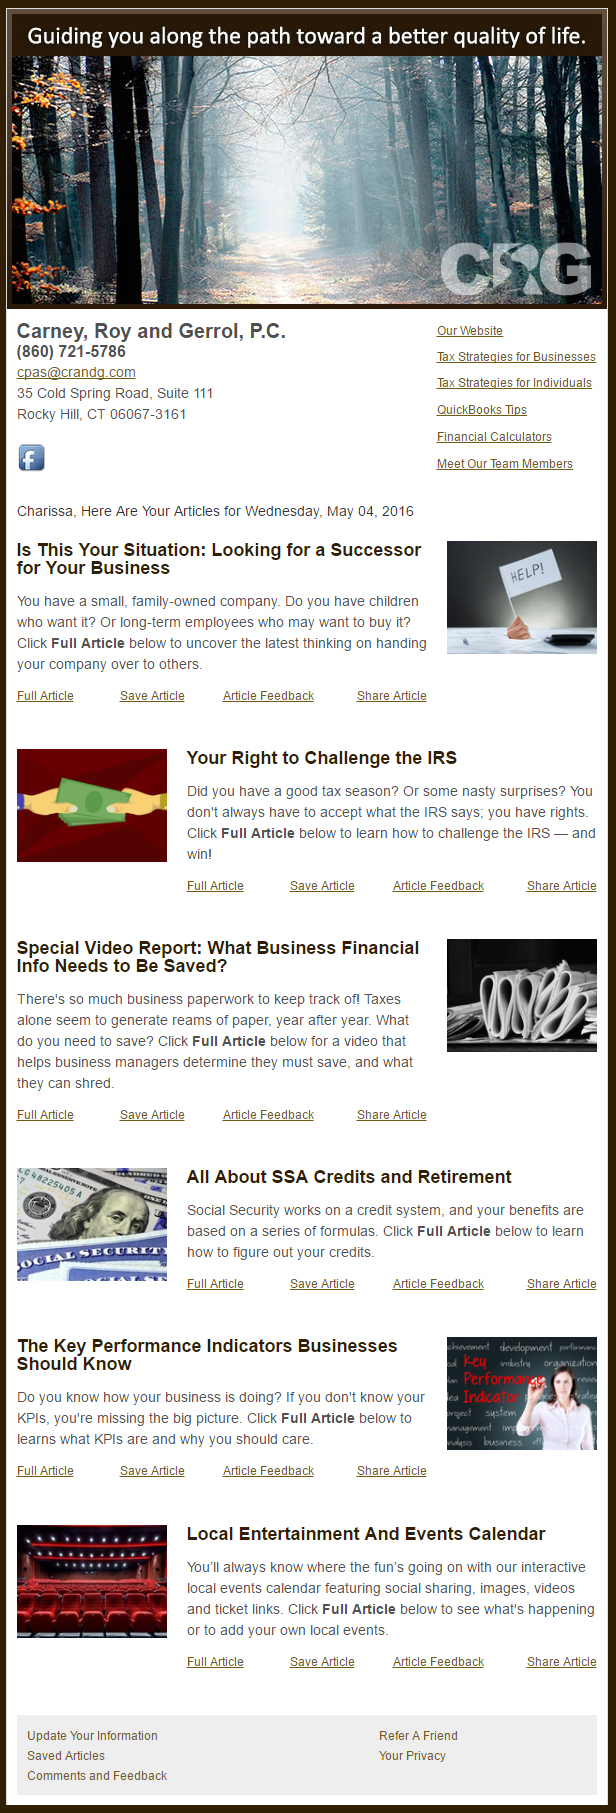 Carney, Roy and Gerrol, P.C. CPAs - IndustryNewsletters Sample Email Newsletter